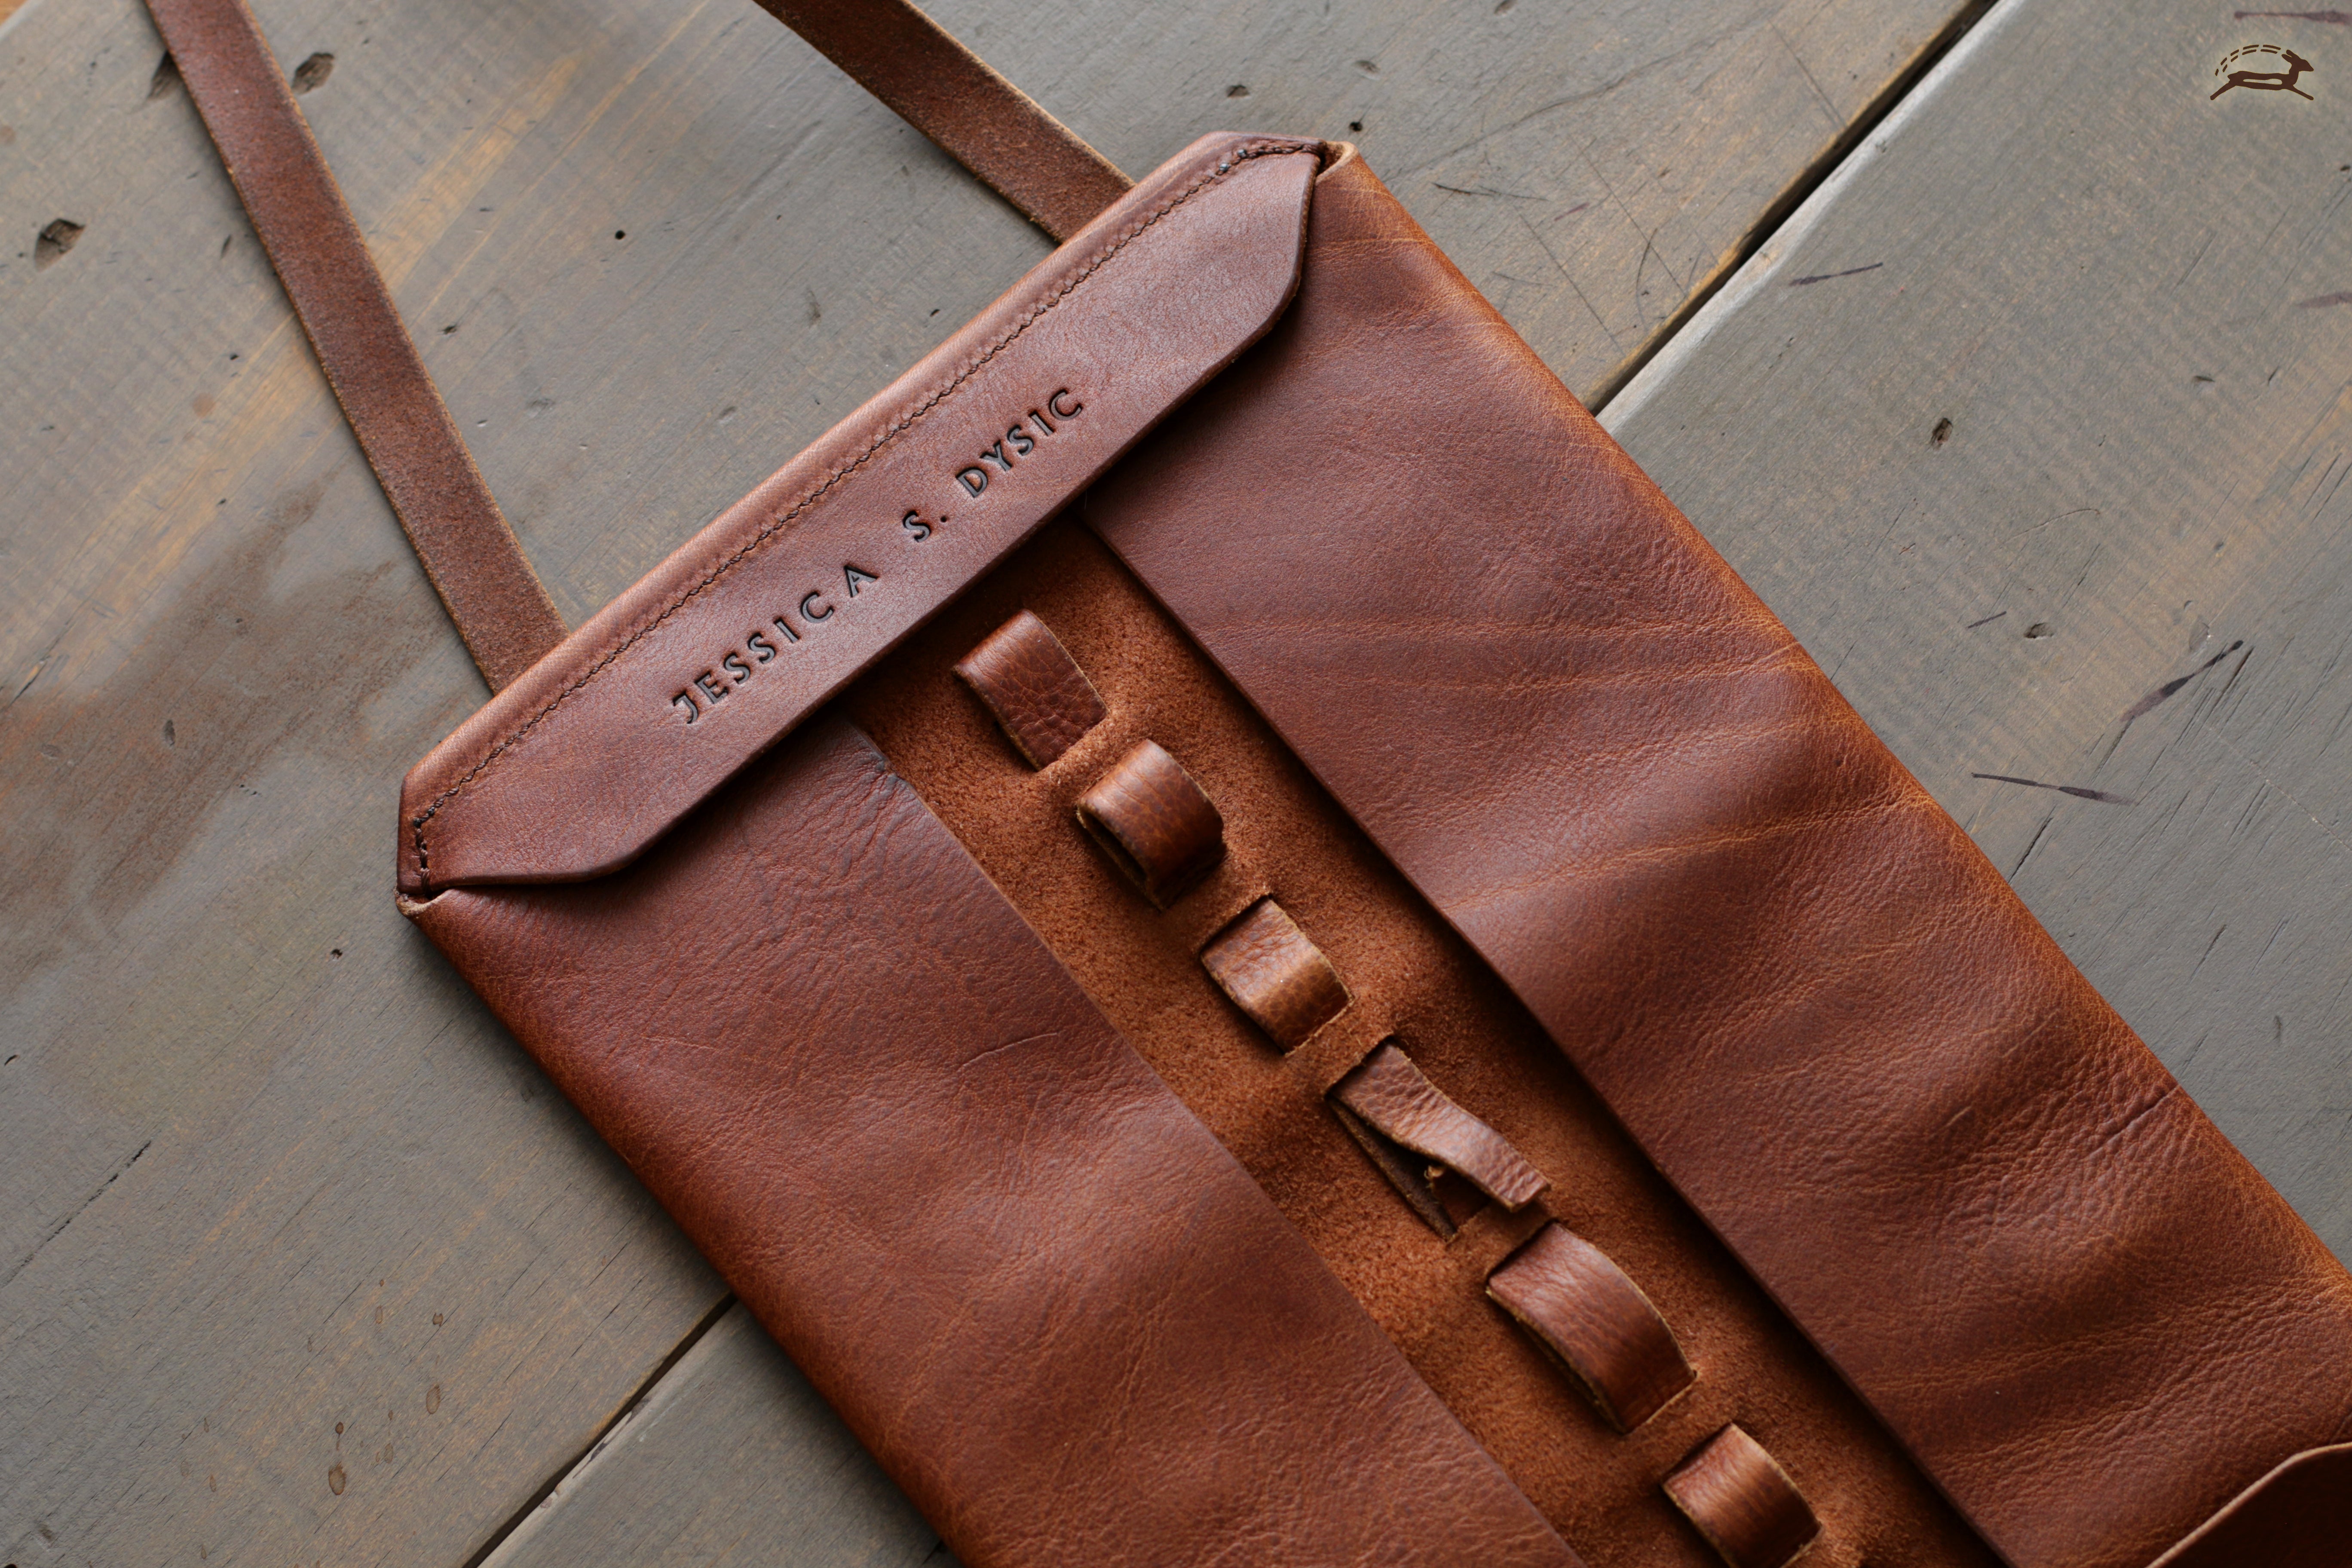 monogrammed leather tool roll - OCHRE handcrafted